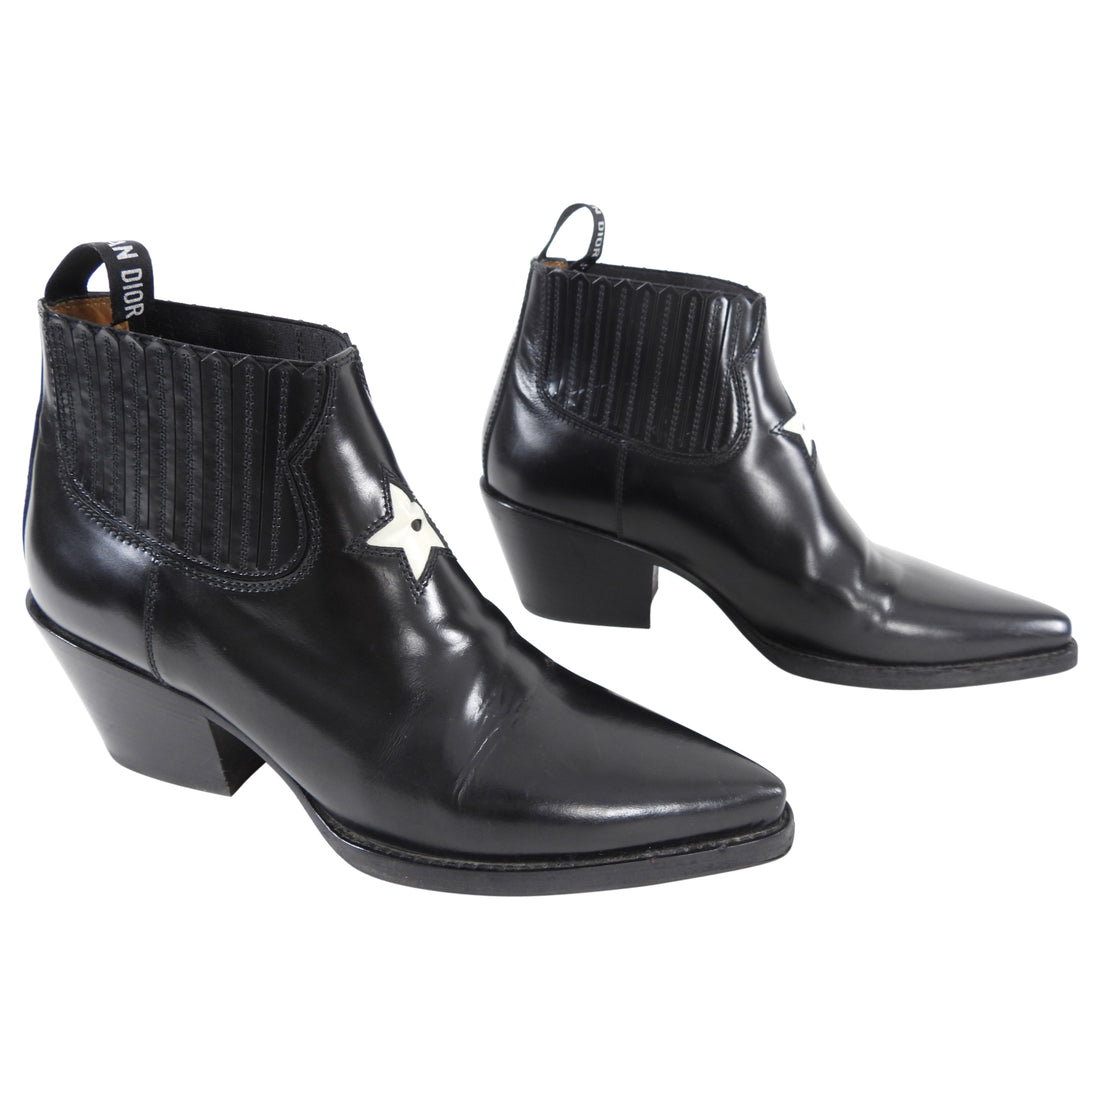 Dior LA Black Western Ankle Boots with Star - USA 6